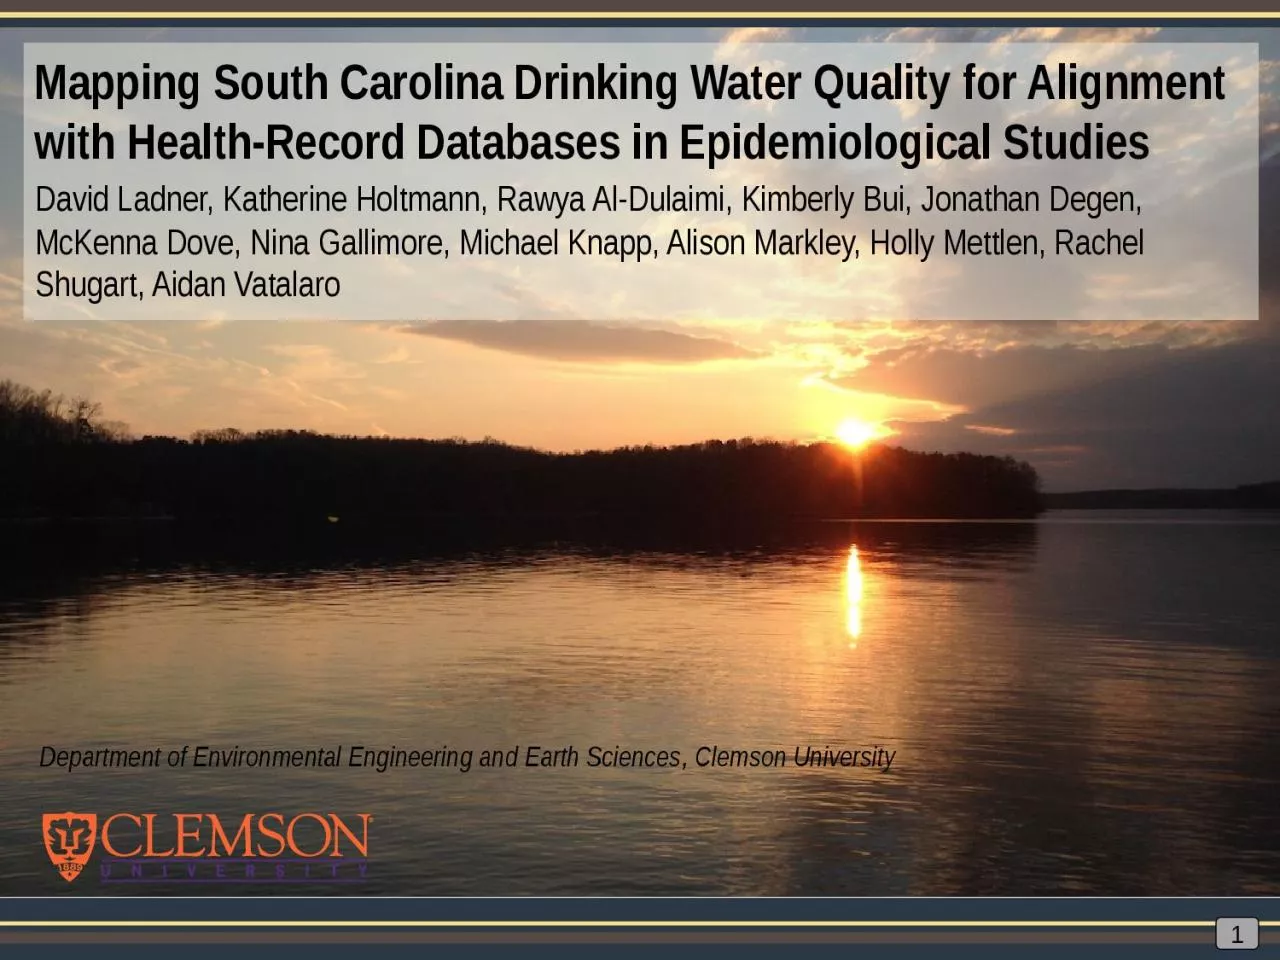 Mapping South Carolina Drinking Water Quality for Alignment with Health-Record Databases